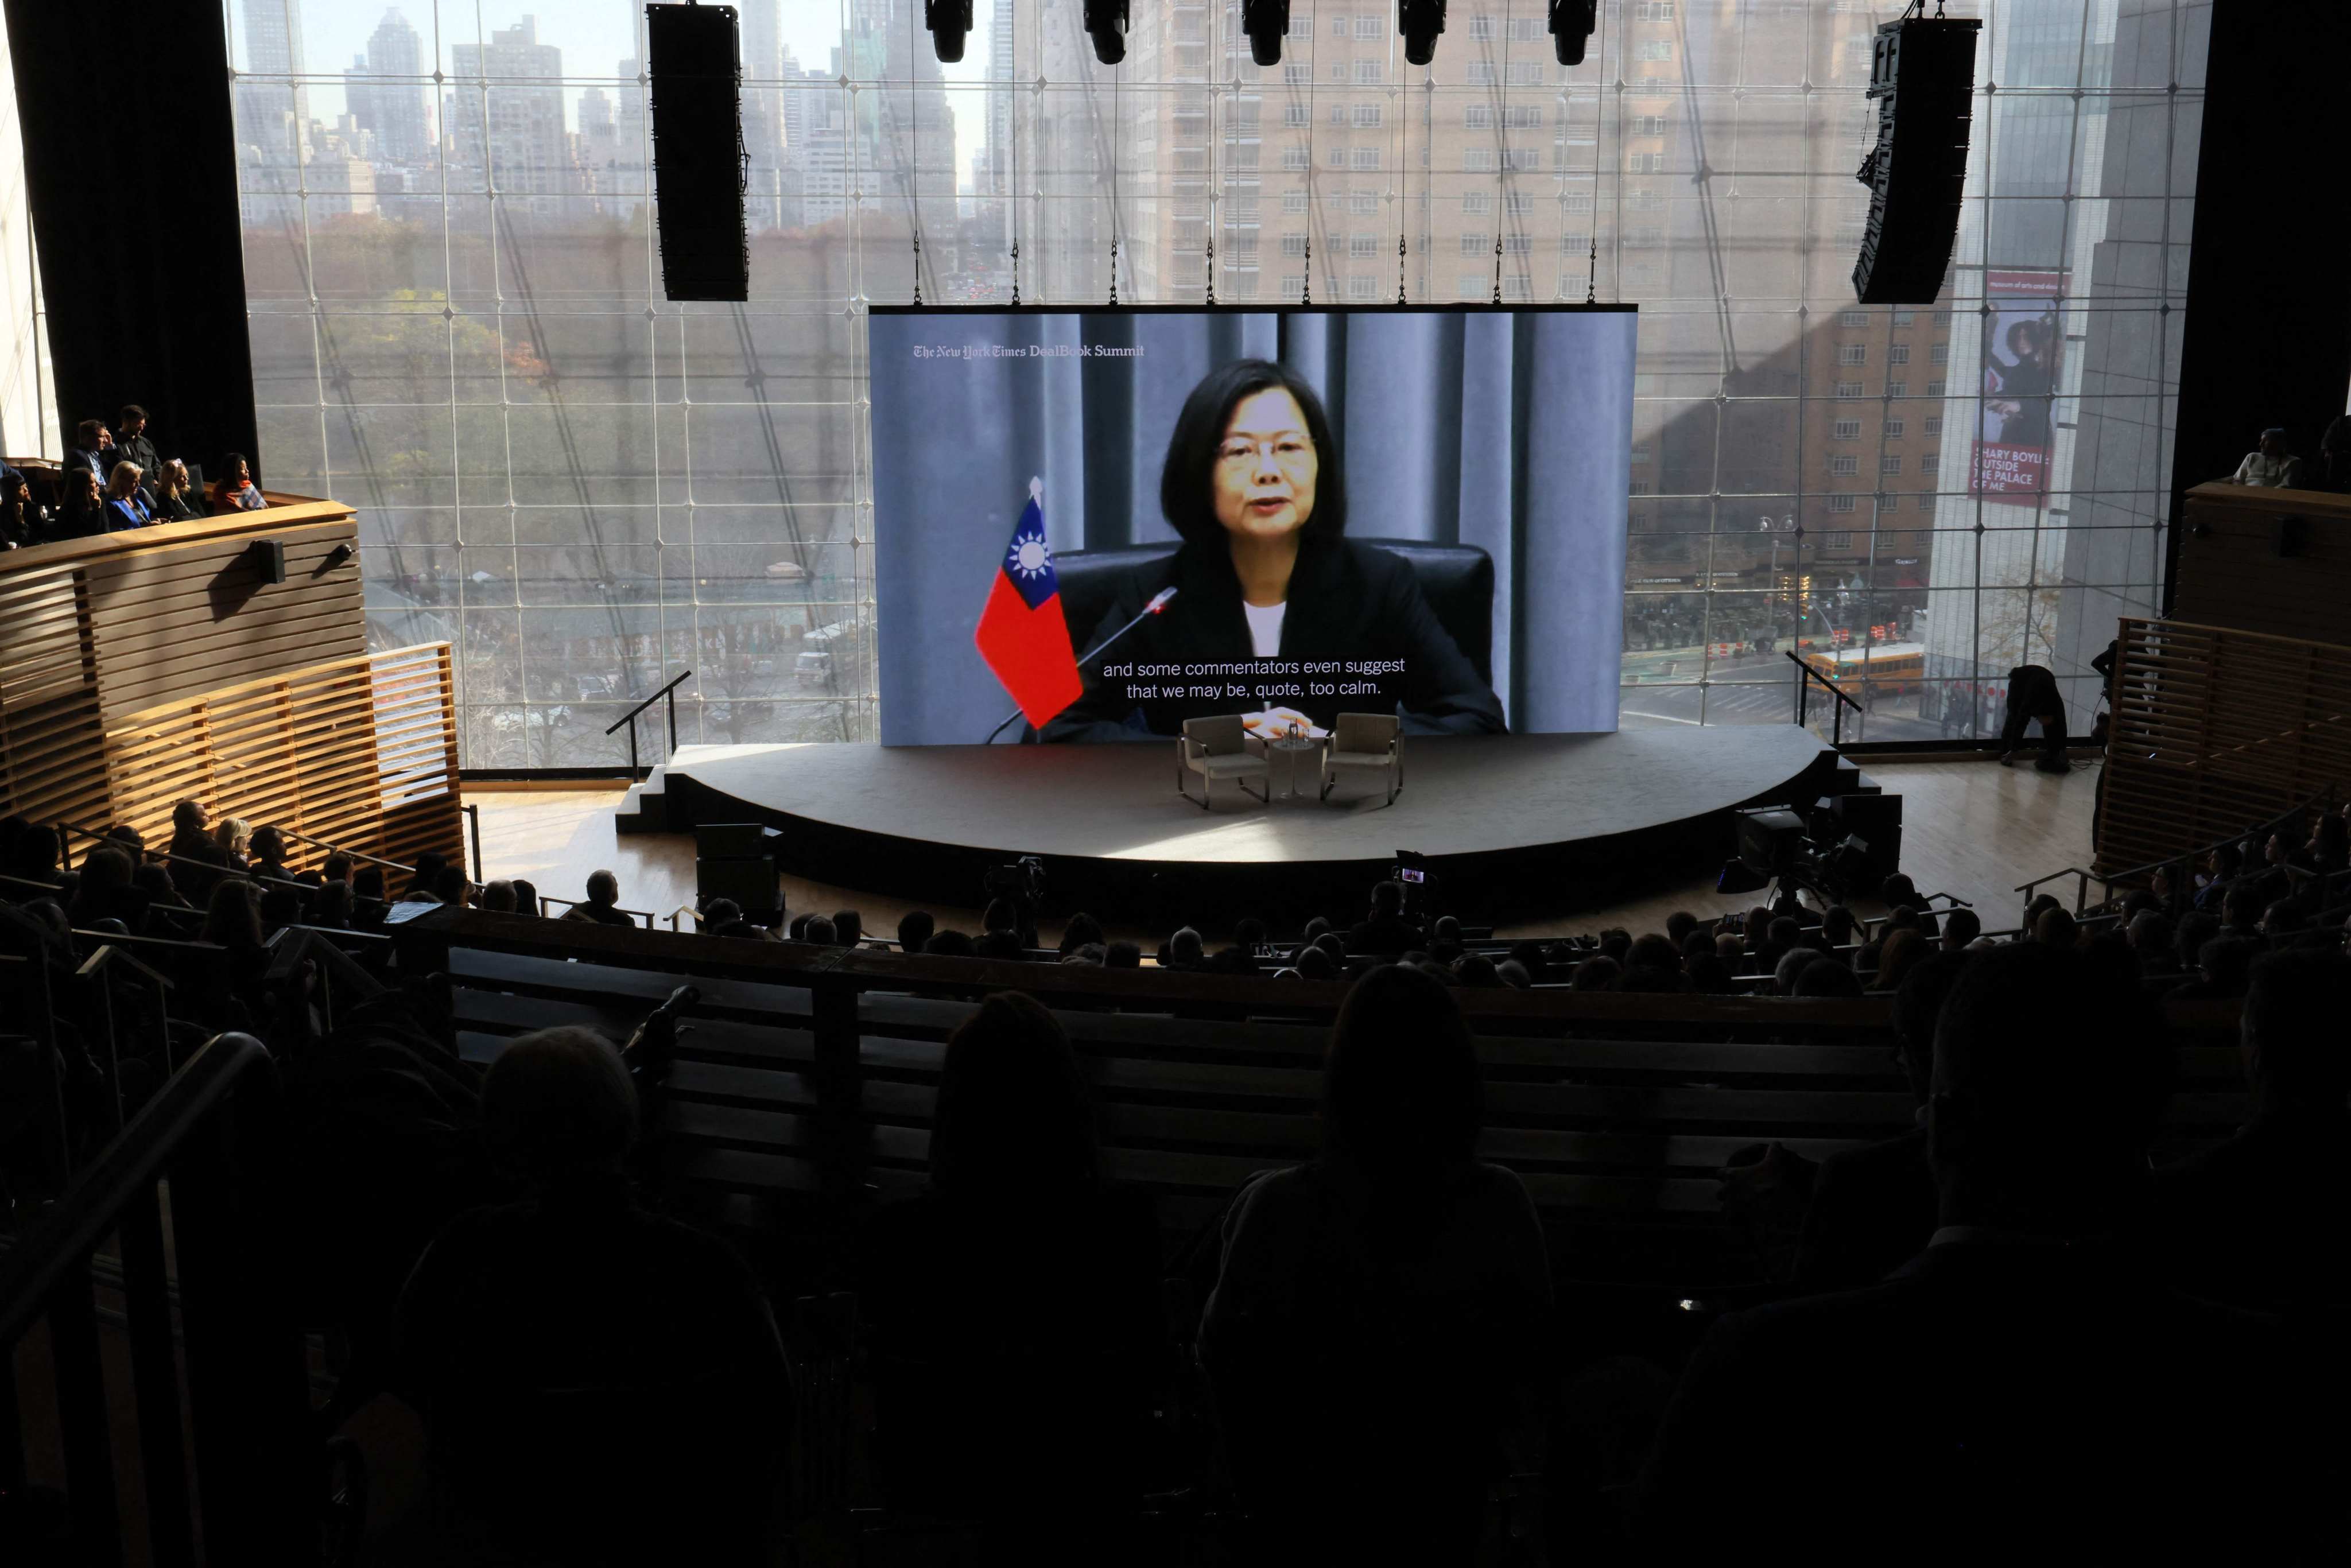 A record interview with Taiwan’s President Tsai Ing-wen is displayed on a screen during the New York Times DealBook summit on Wednesday. Photo: AFP